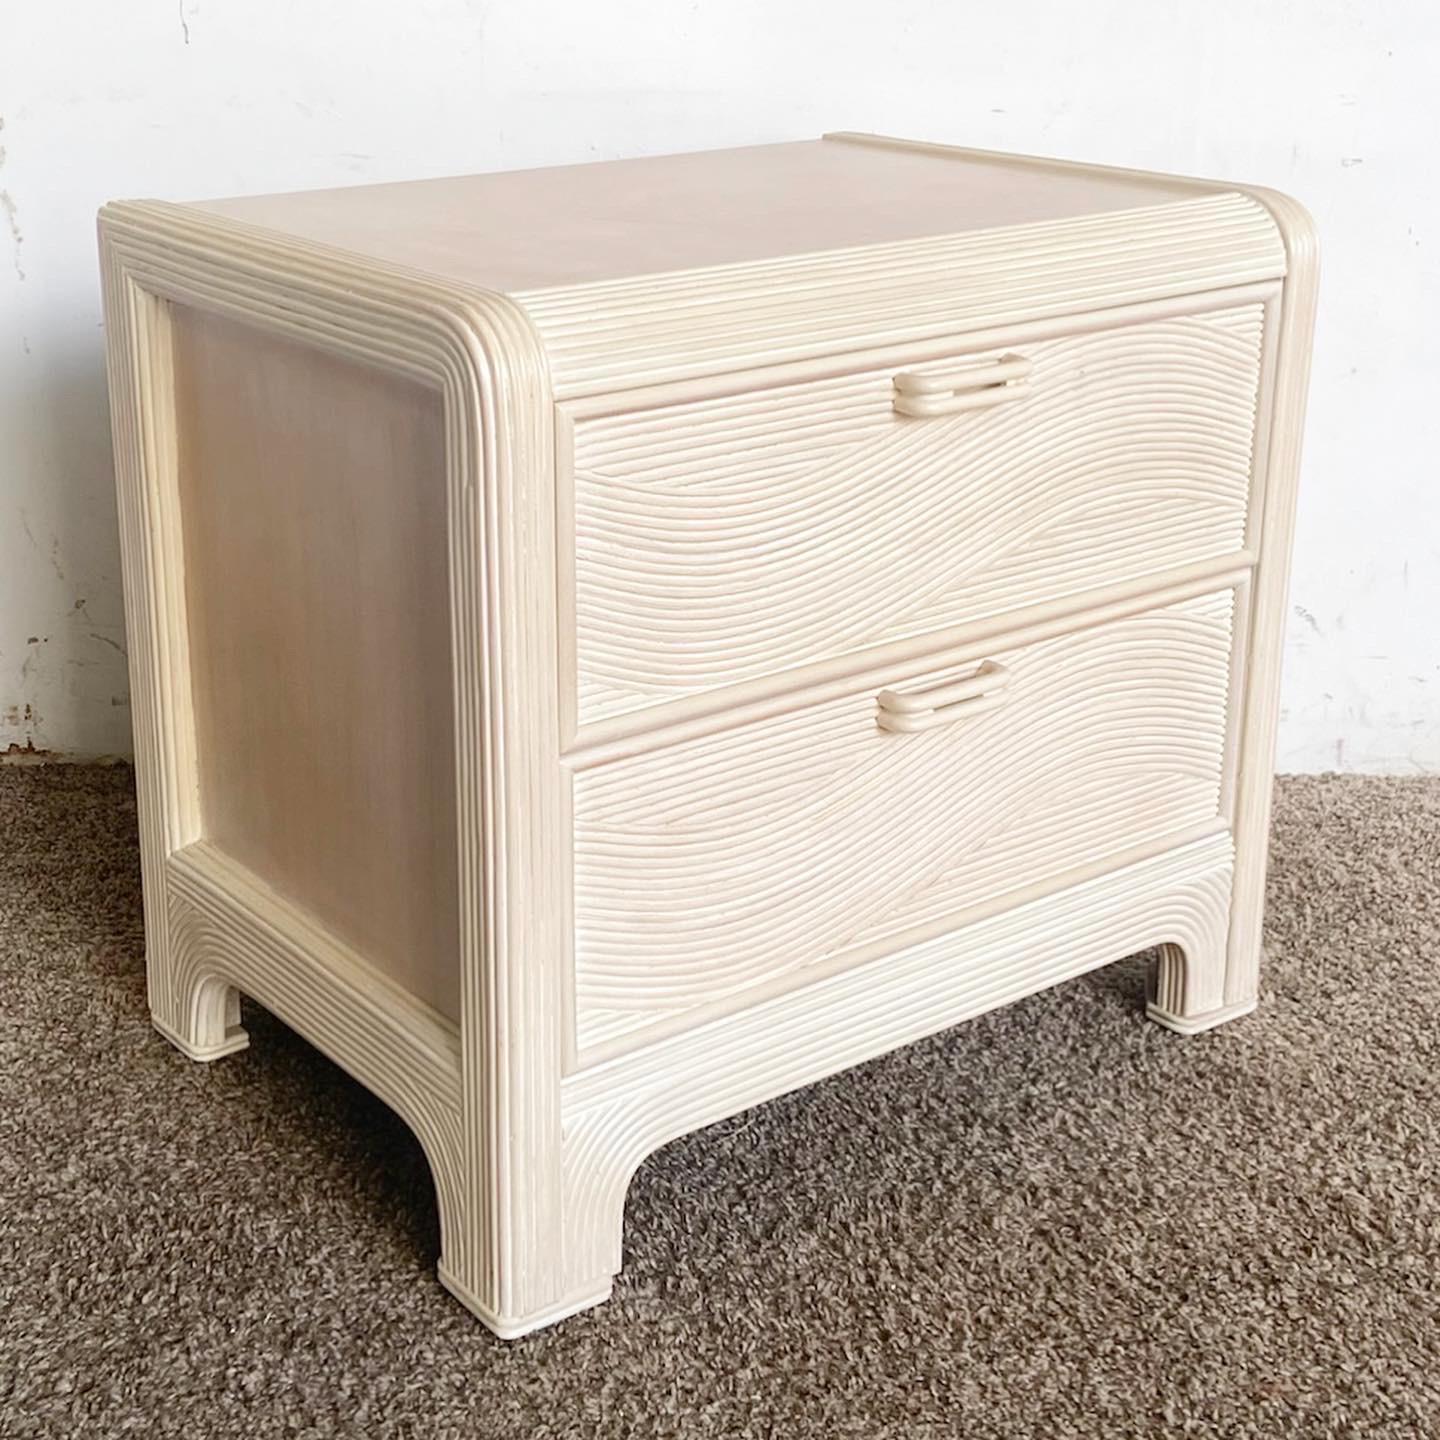 The Boho Chic Pencil Reed Nightstand by American Drew - a blend of unique texture, bohemian spirit, and impeccable craftsmanship.

Boho Chic Pencil Reed Nightstand by American Drew.
Distinctive pencil reed design embodies bohemian spirit.
Seamlessly